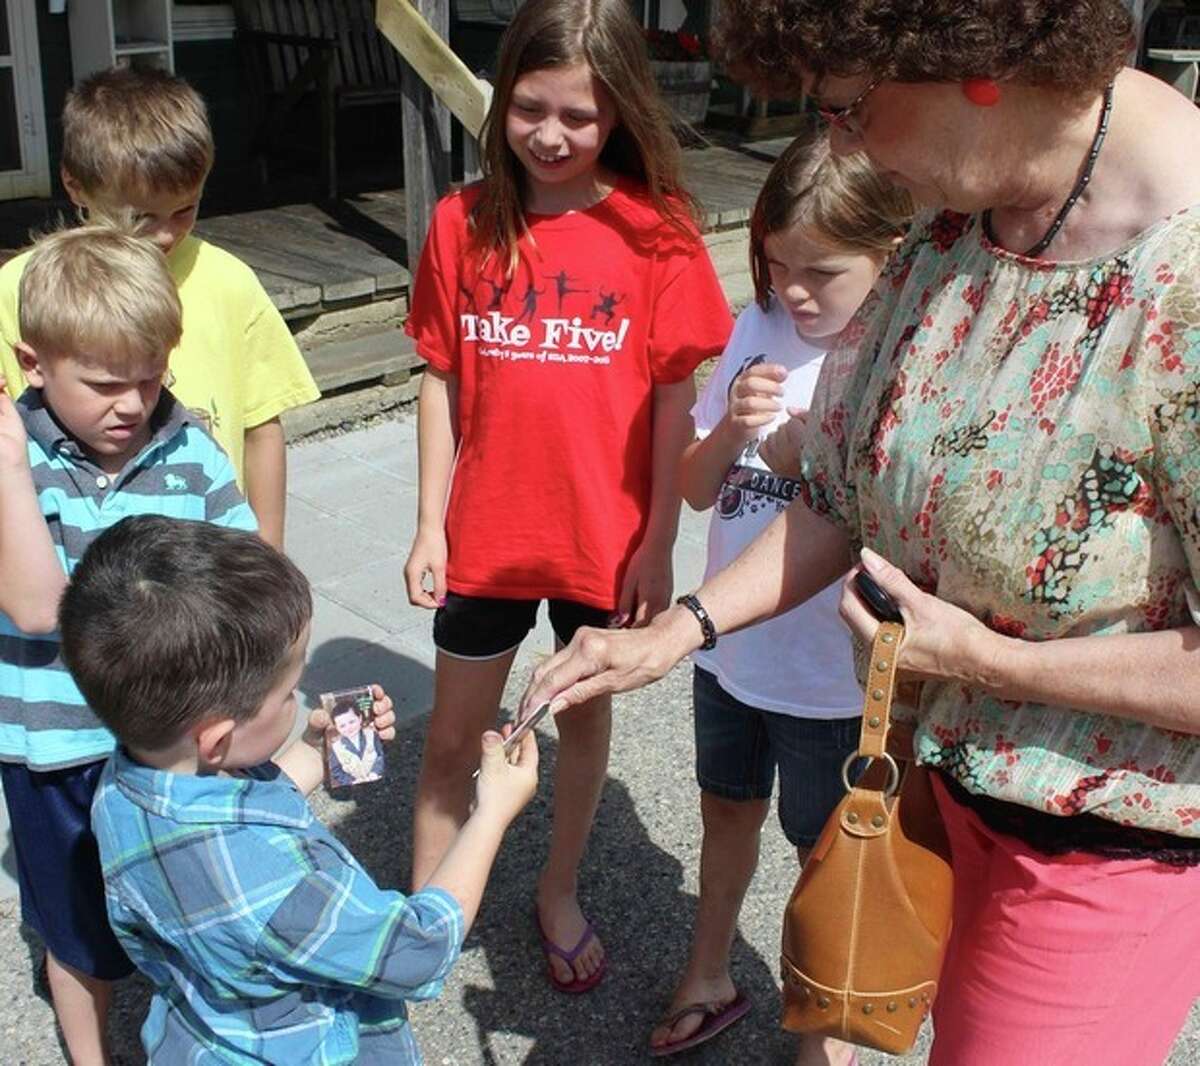 In this photo made Wednesday, June 26, 2013 in Dorset , Minn., Bobby Tufts, the 4-year-old mayor, hands out his card to potential voters for his re-election bid. Bobby was only 3 when he won election last year as mayor of Dorset (population 22 to 28, depending on whether the minister and his family are in town). Dorset, which bills itself as the Restaurant Capital of the World, has no formal city government. (AP Photo/Jeff Baenen)